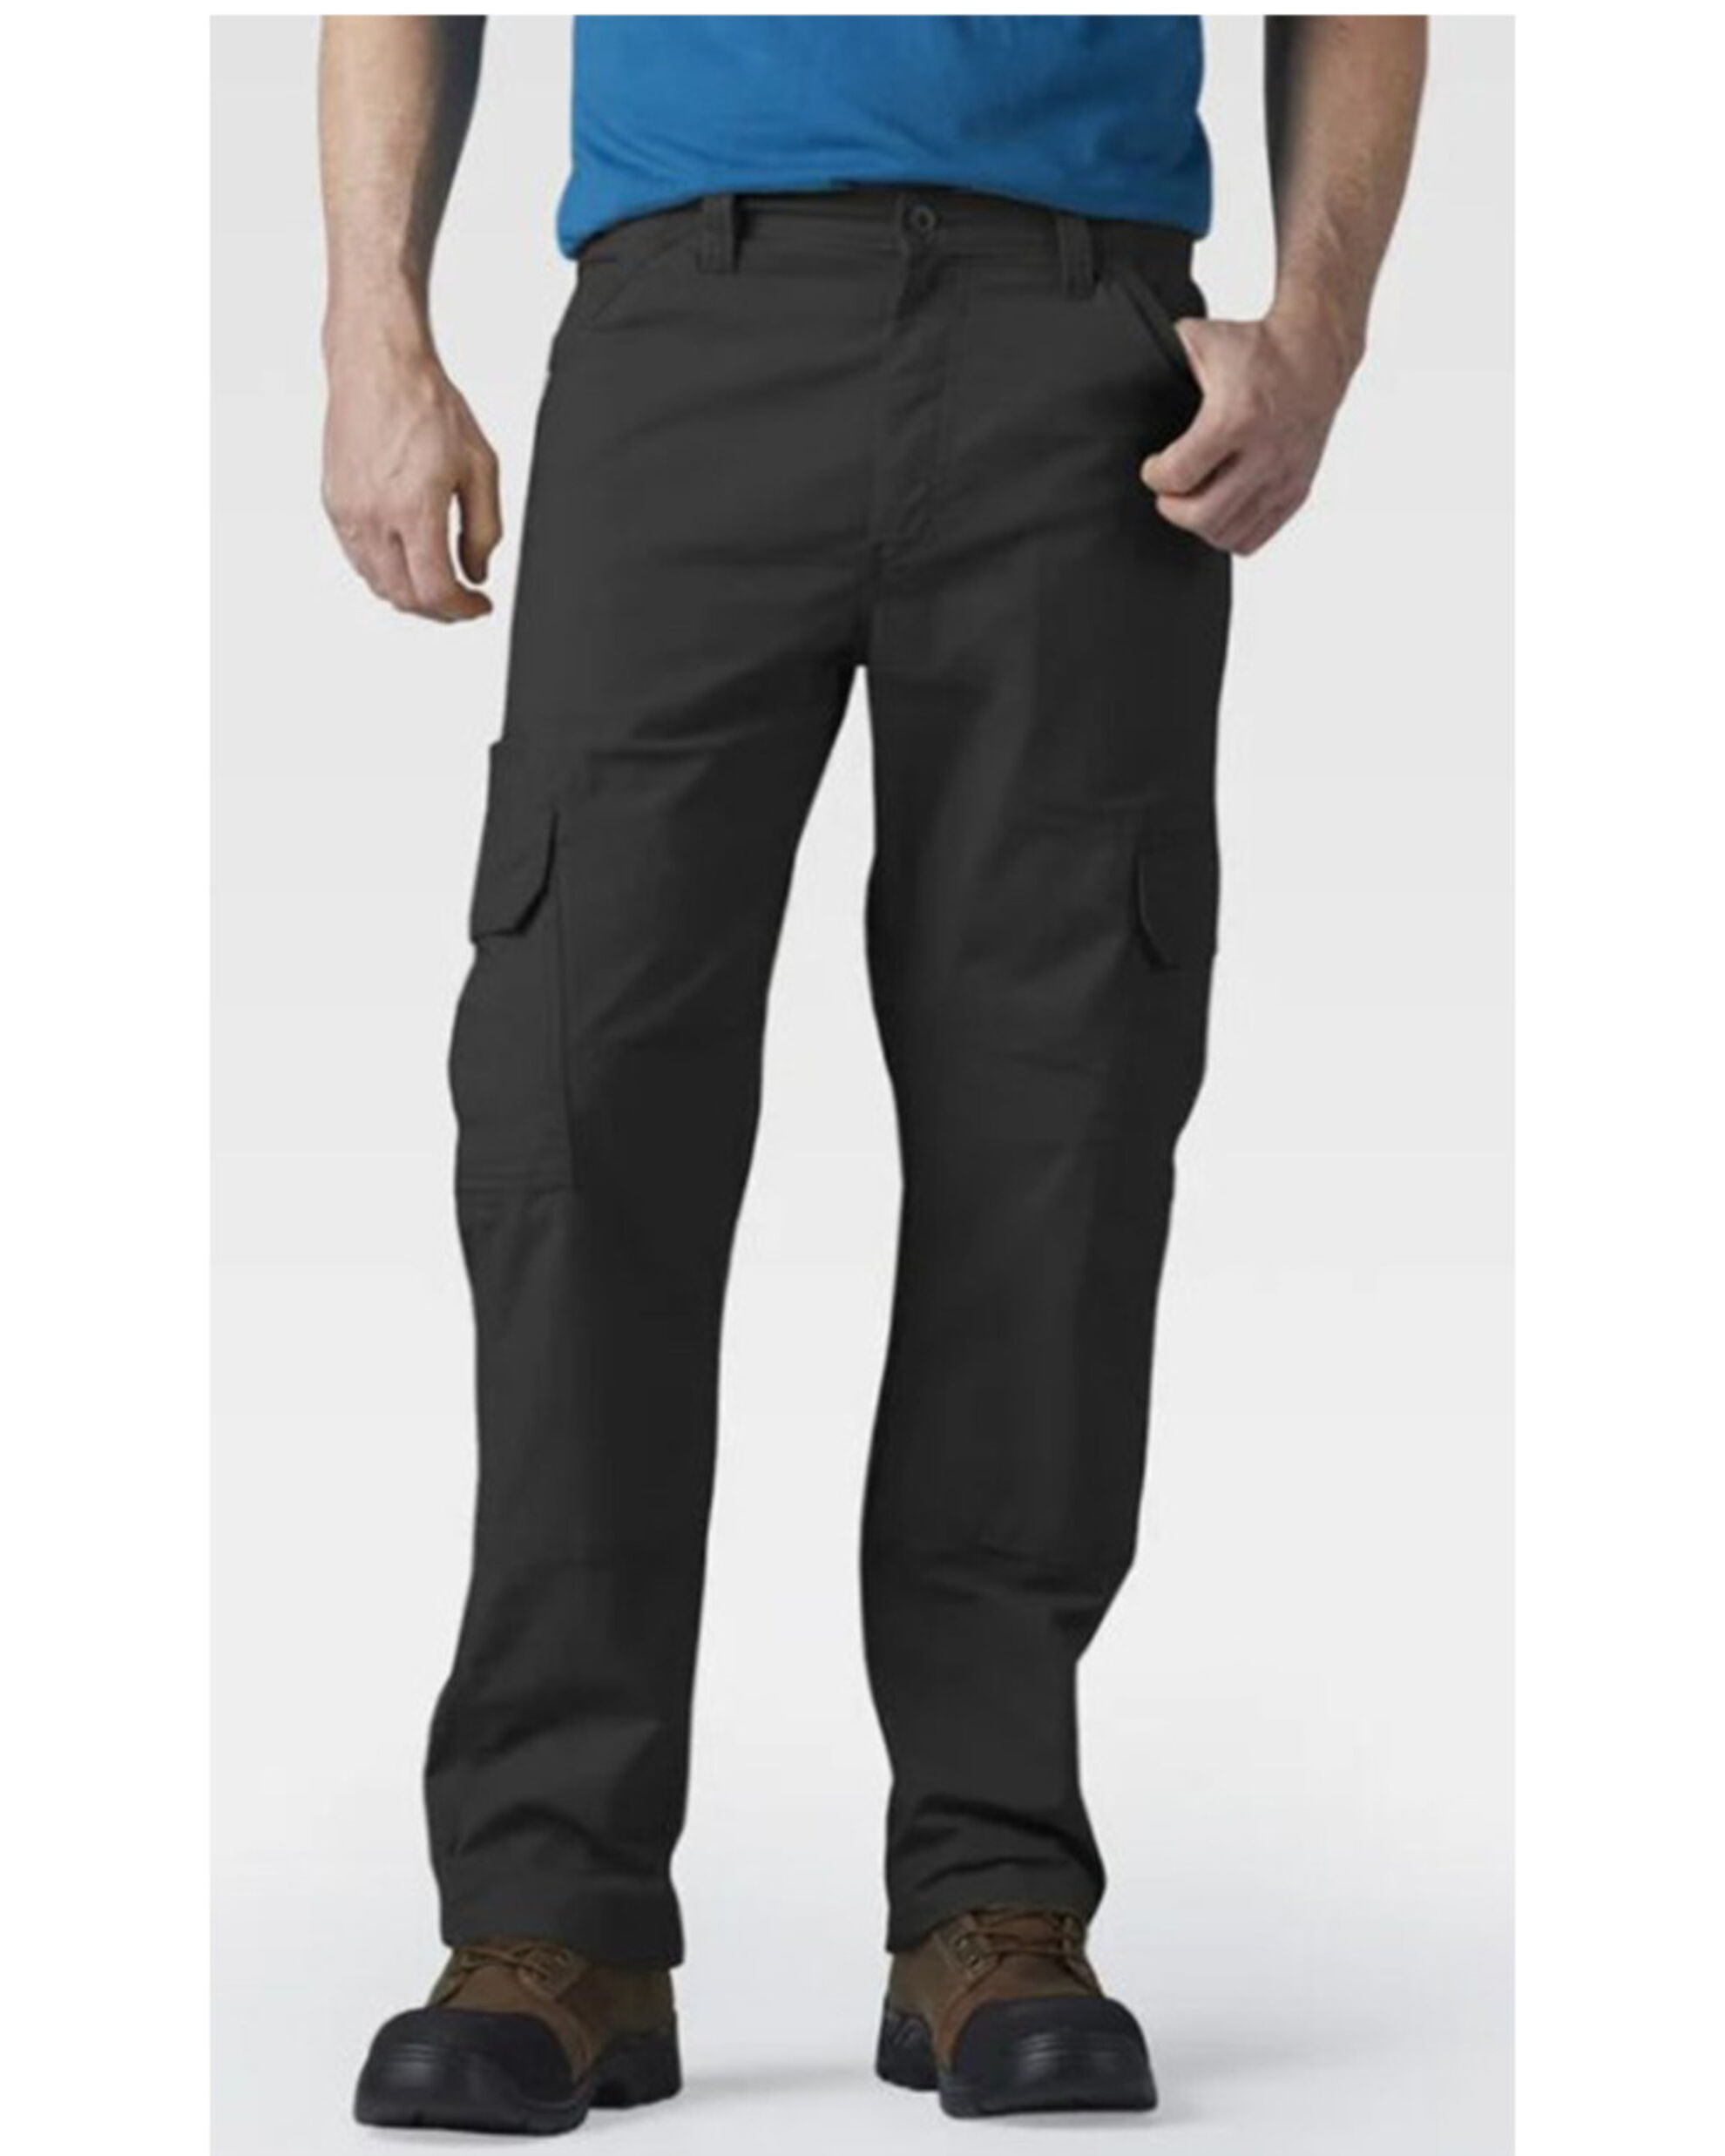 simply complicated mechanic cargo pant-